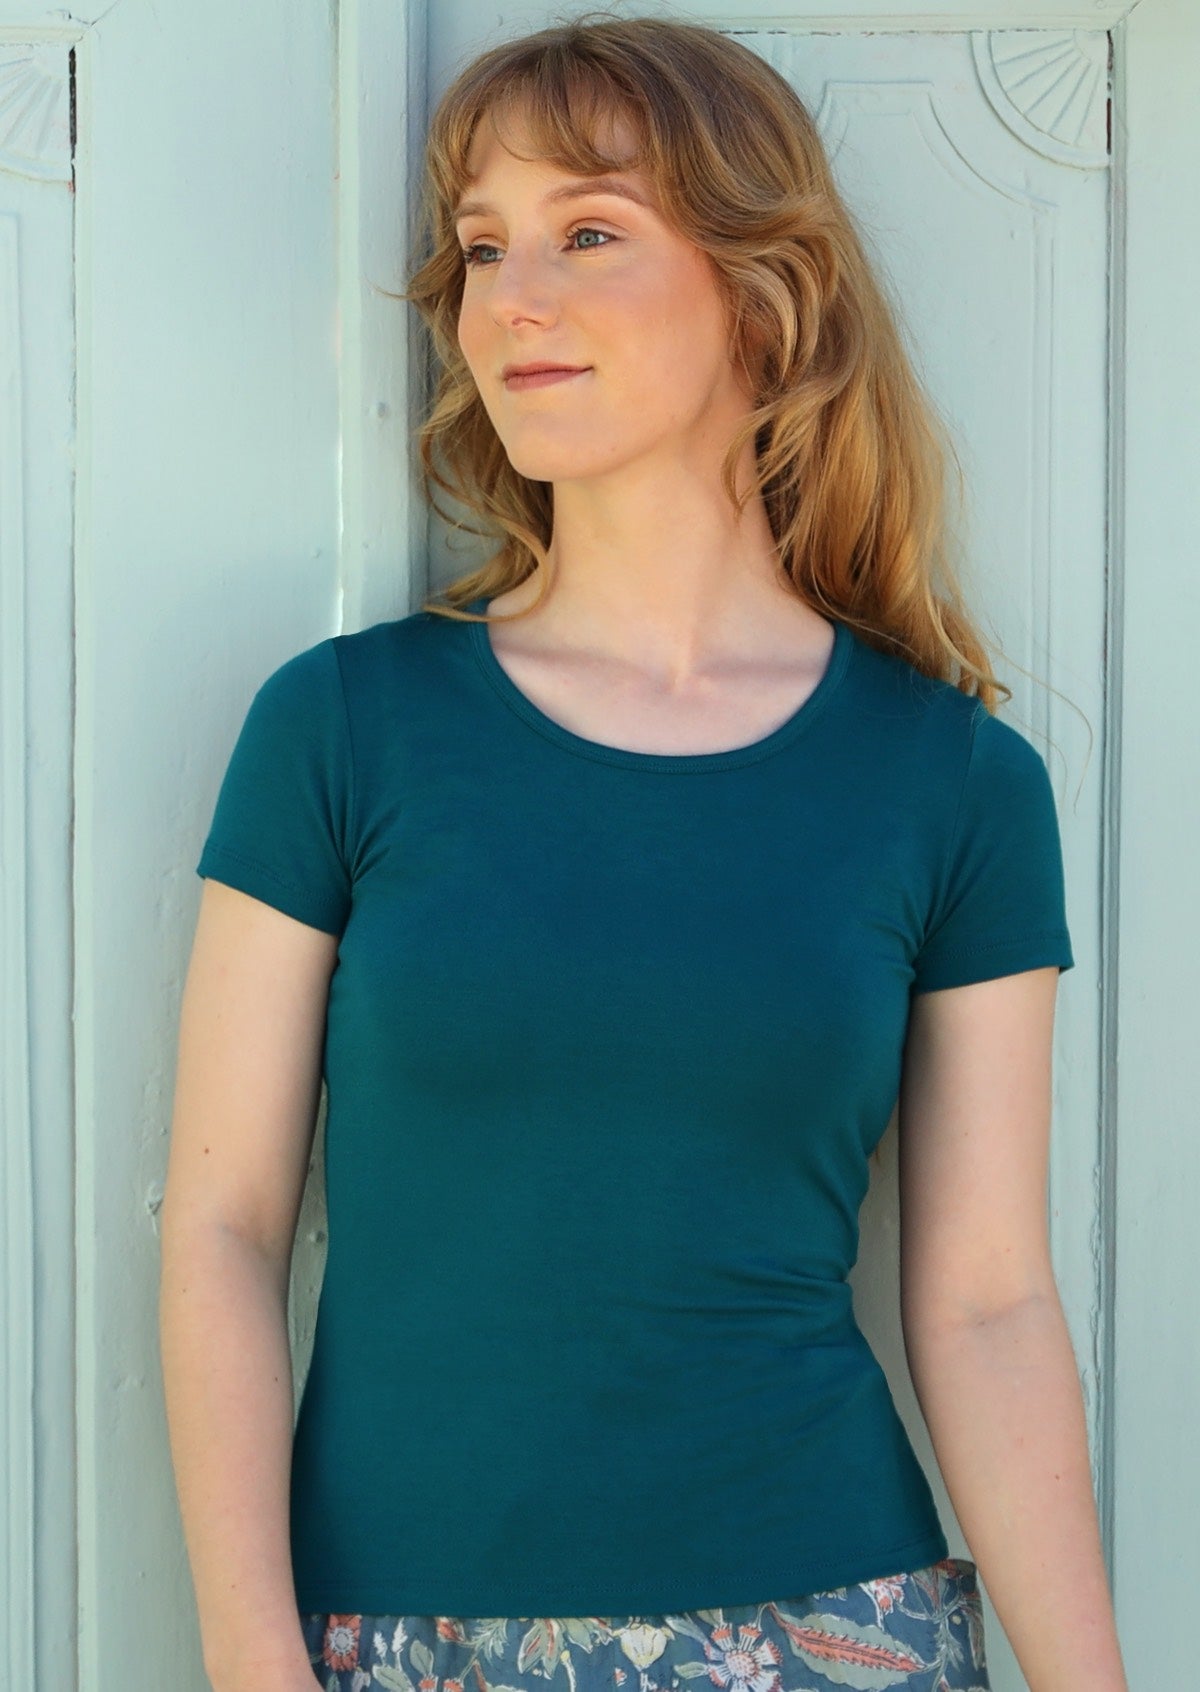 Woman wearing a scoop neck teal rayon fitted t-shirt.